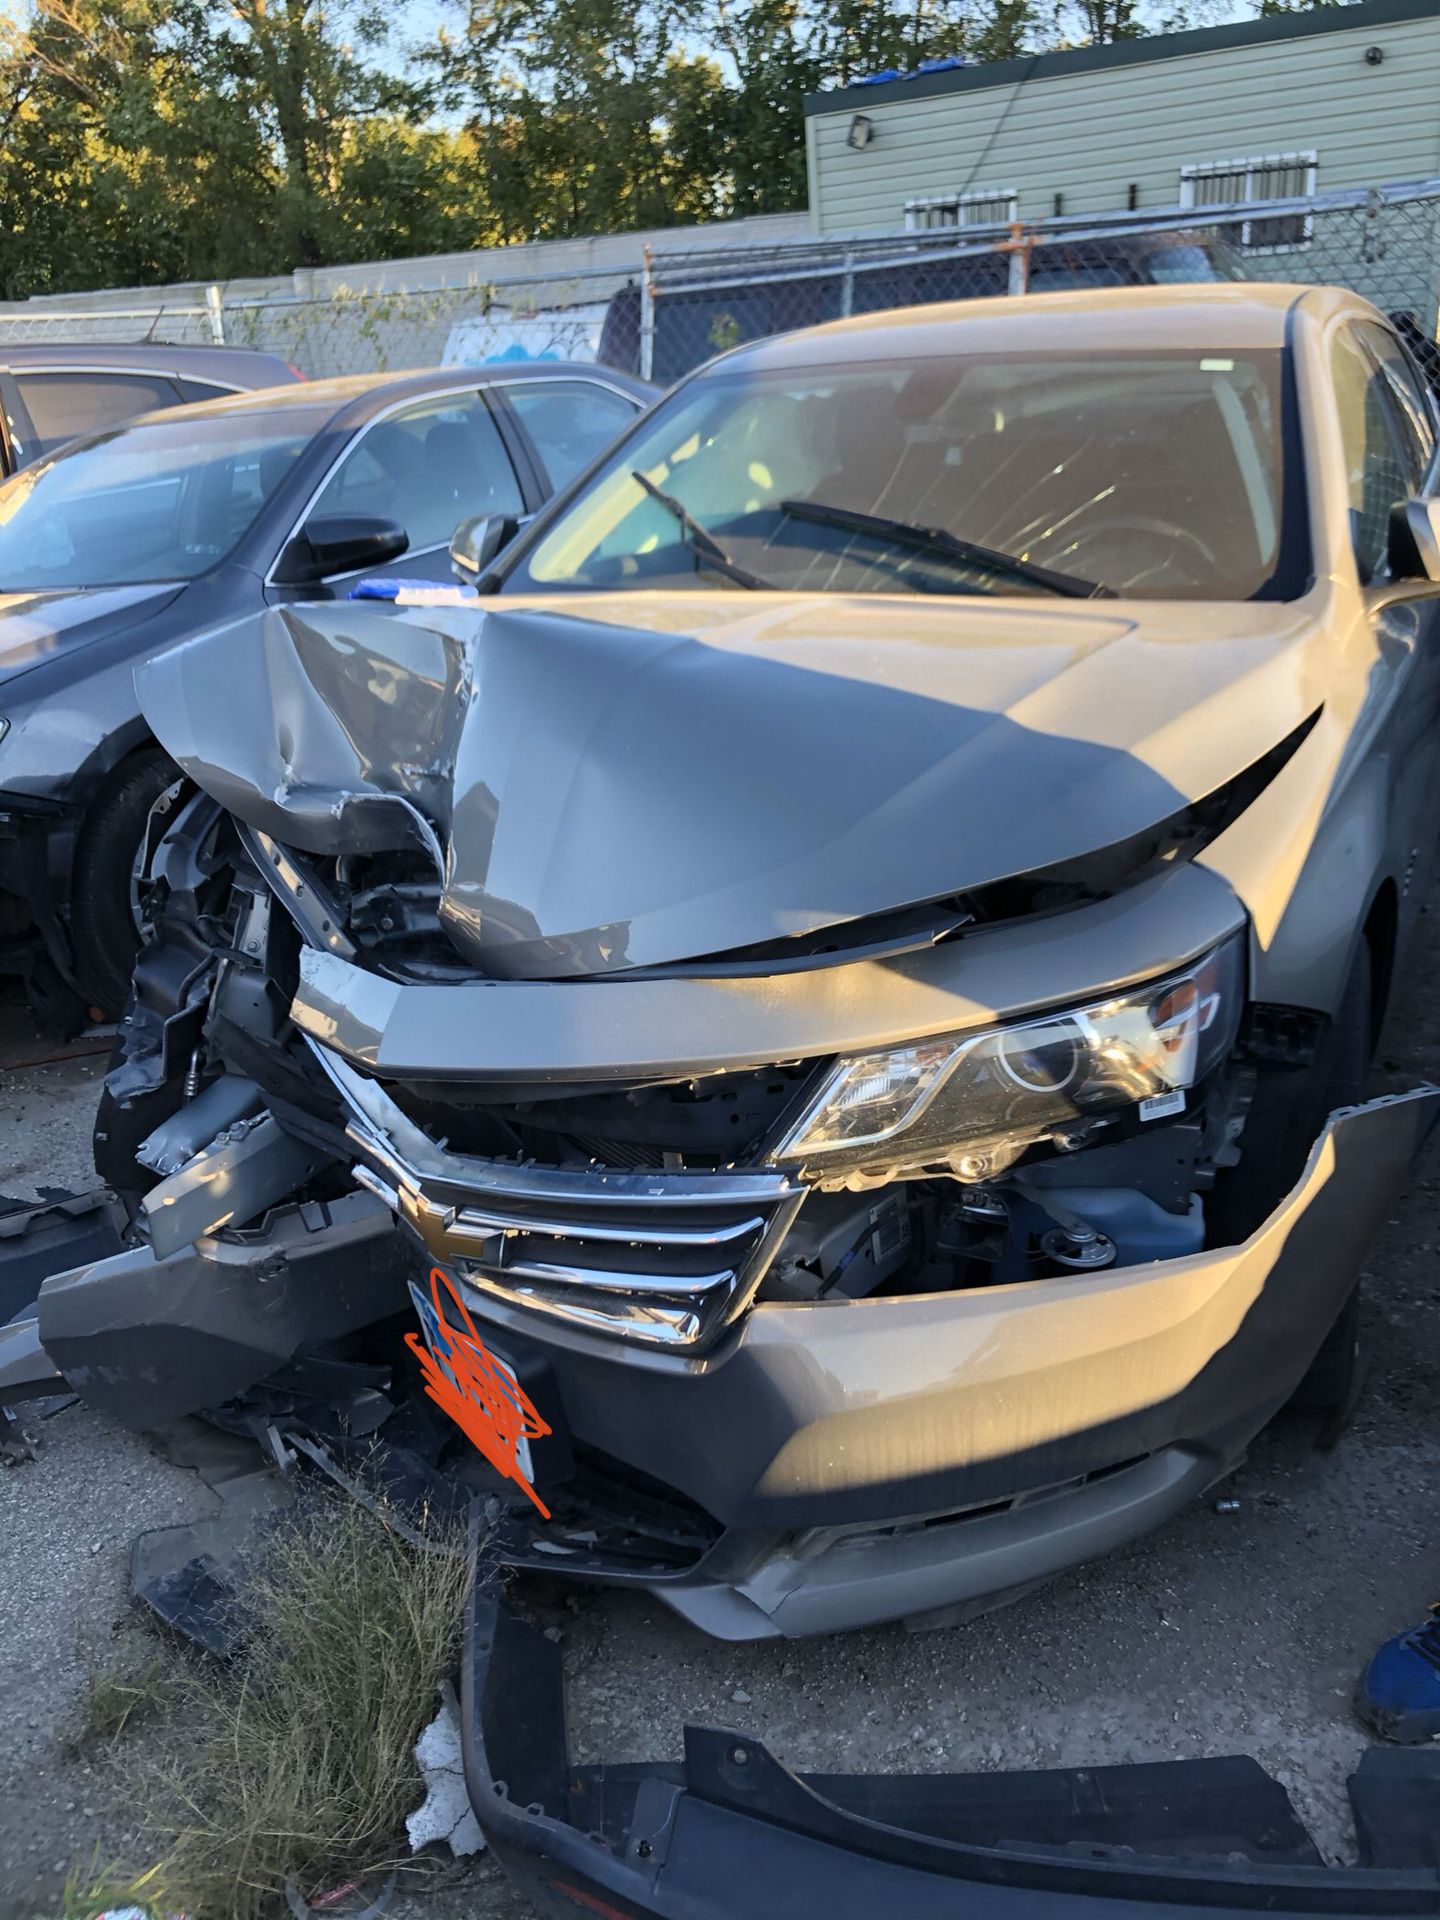 2019 Chevy impala ((( FOR PARTS ONLY ))) do not ask how much for whole car!